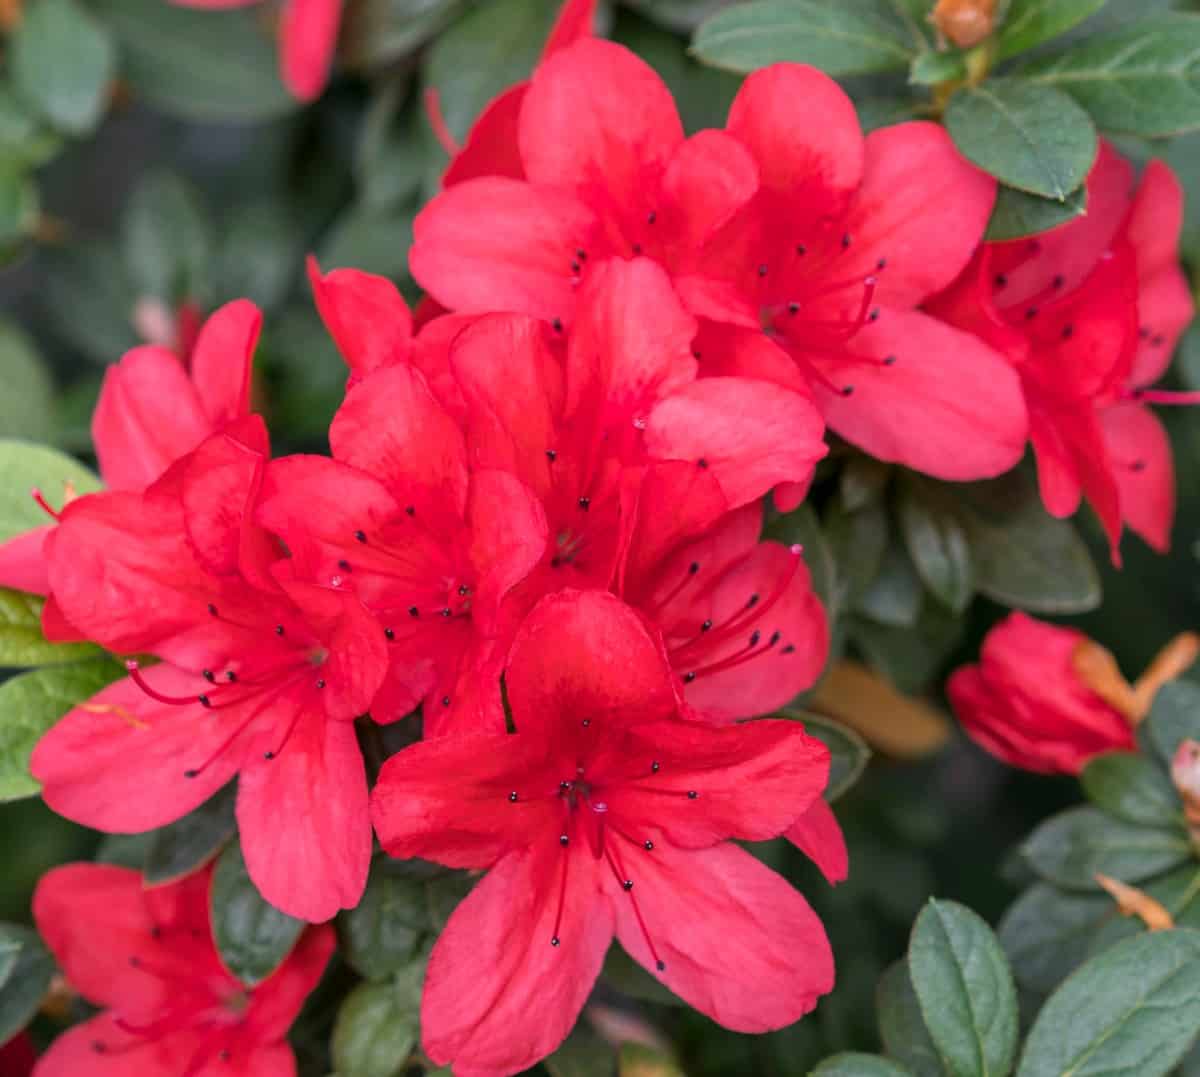 Bloom-a-thon red azaleas have five months' worth of flowers.